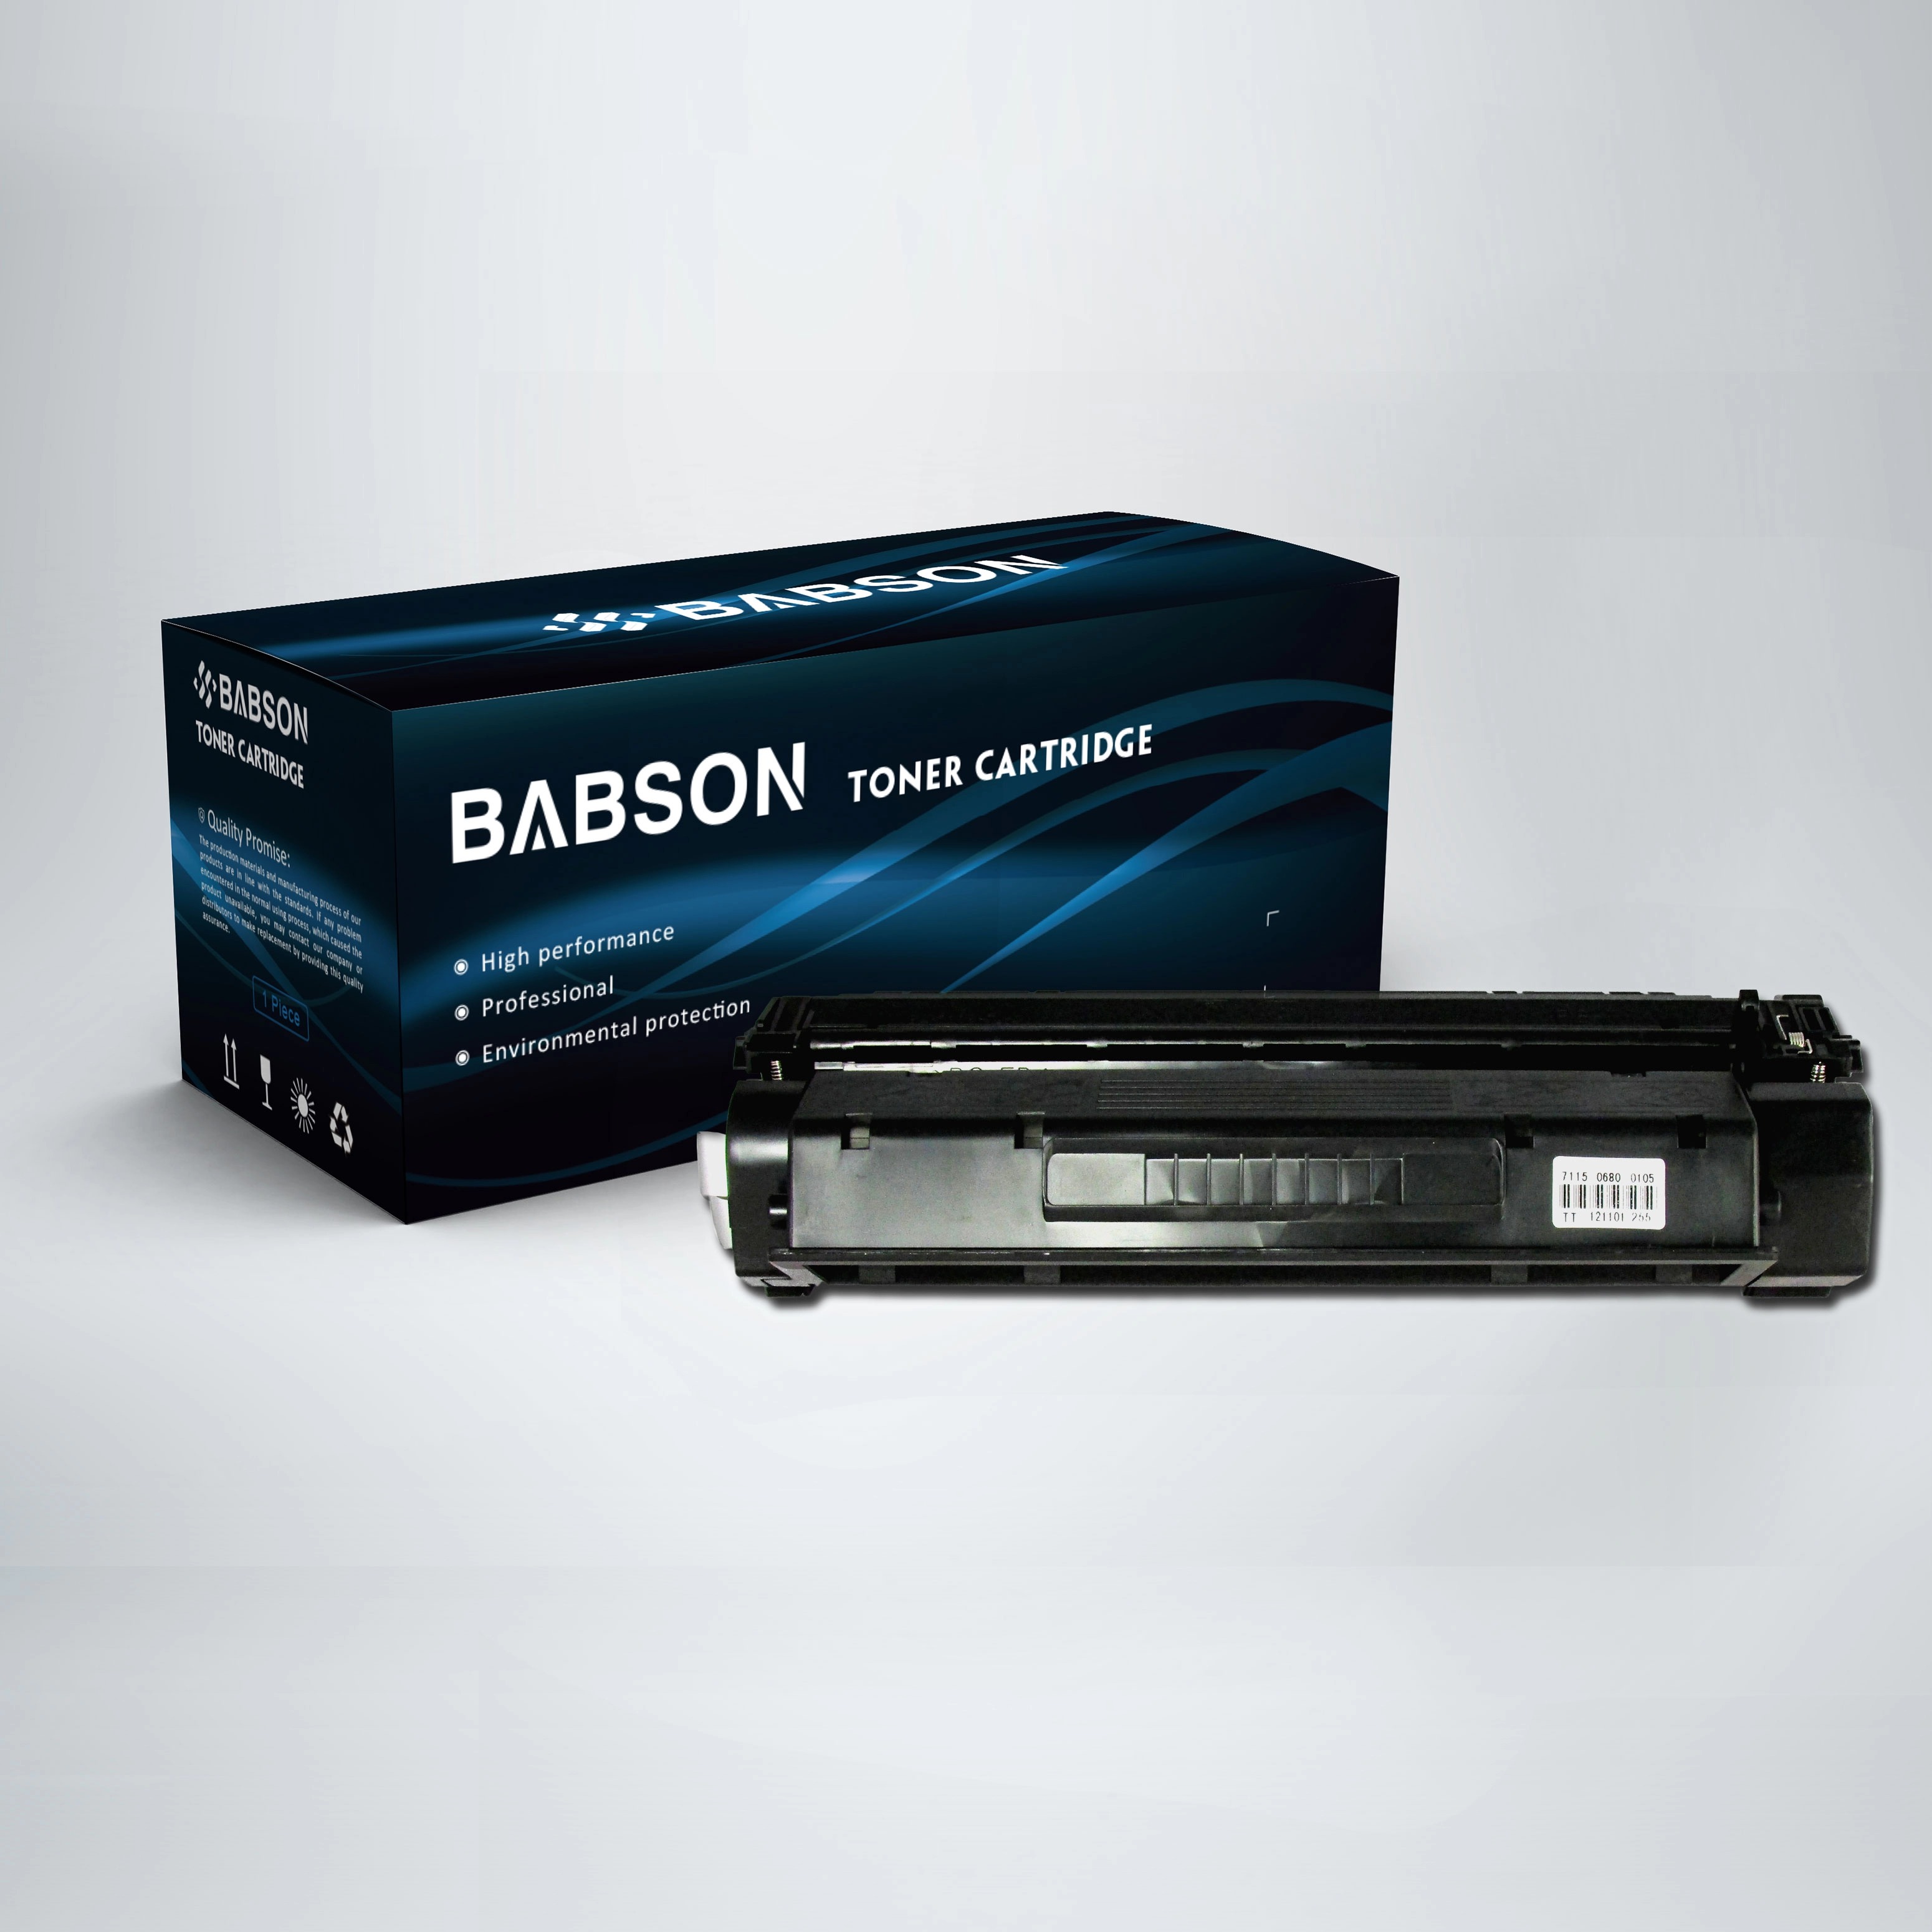 C7115A toner cartridge Use For 1000/1200/1220/3300